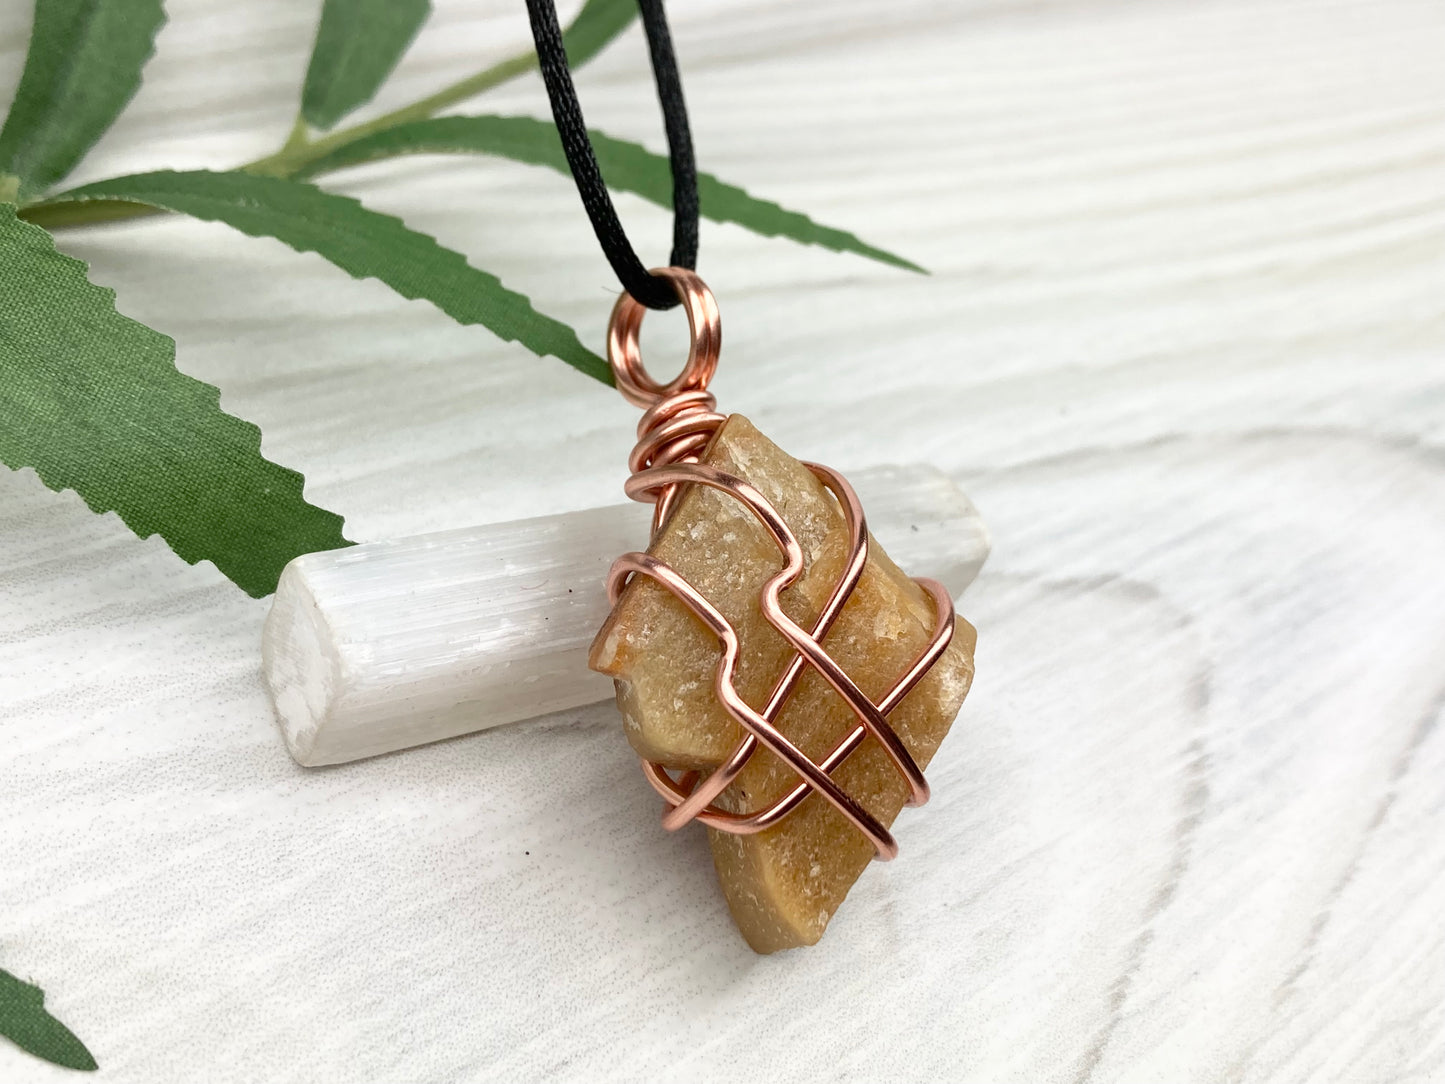 Yellow aventurine necklace. Yellow raw stone wrapped with copper wire. Comes on a black necklace. Handcrafted new age jewelry.